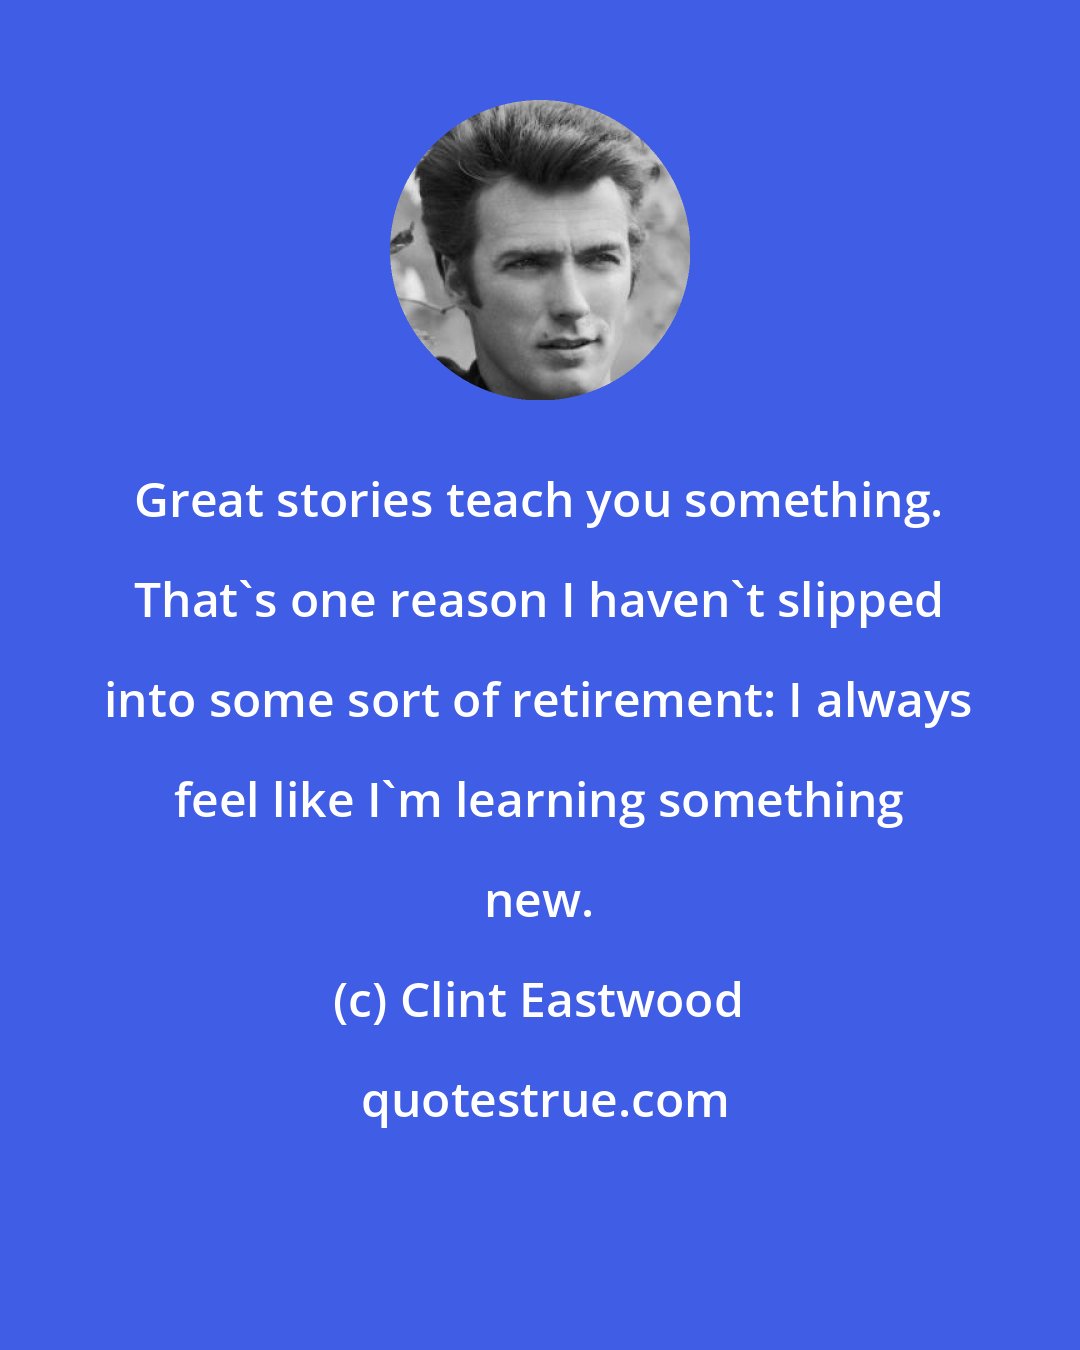 Clint Eastwood: Great stories teach you something. That's one reason I haven't slipped into some sort of retirement: I always feel like I'm learning something new.